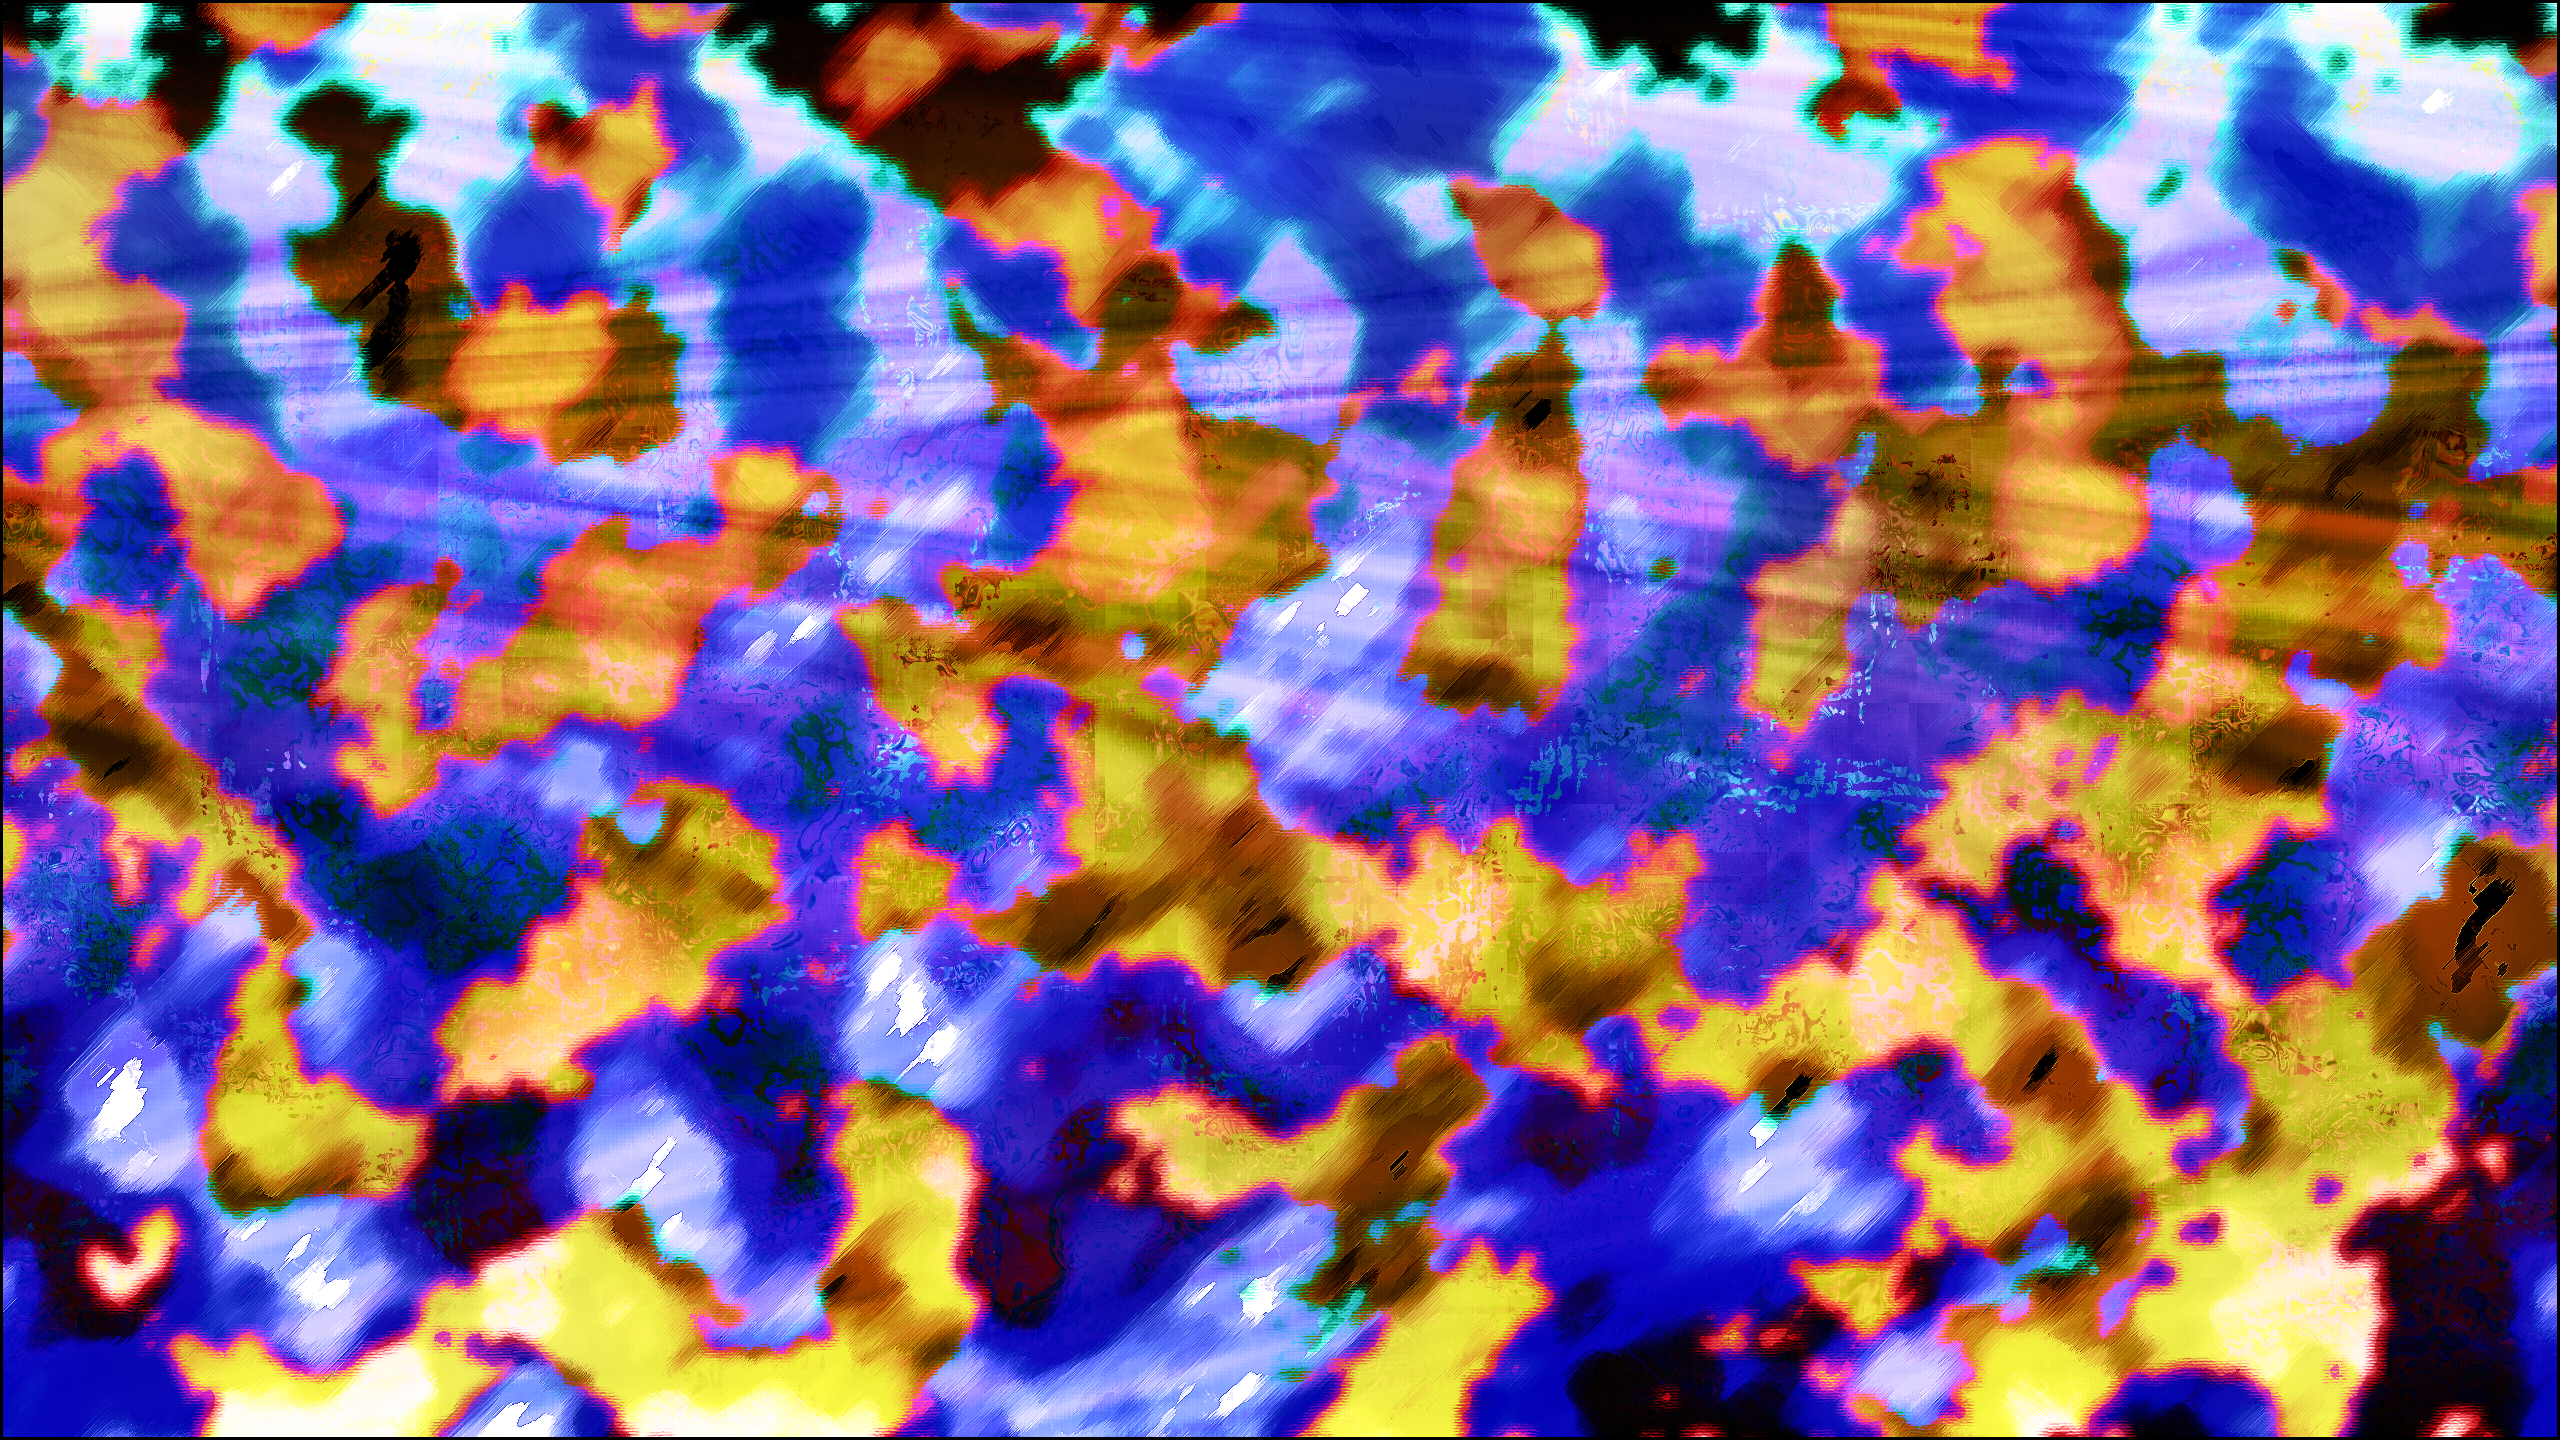 General 2560x1440 abstract trippy brightness